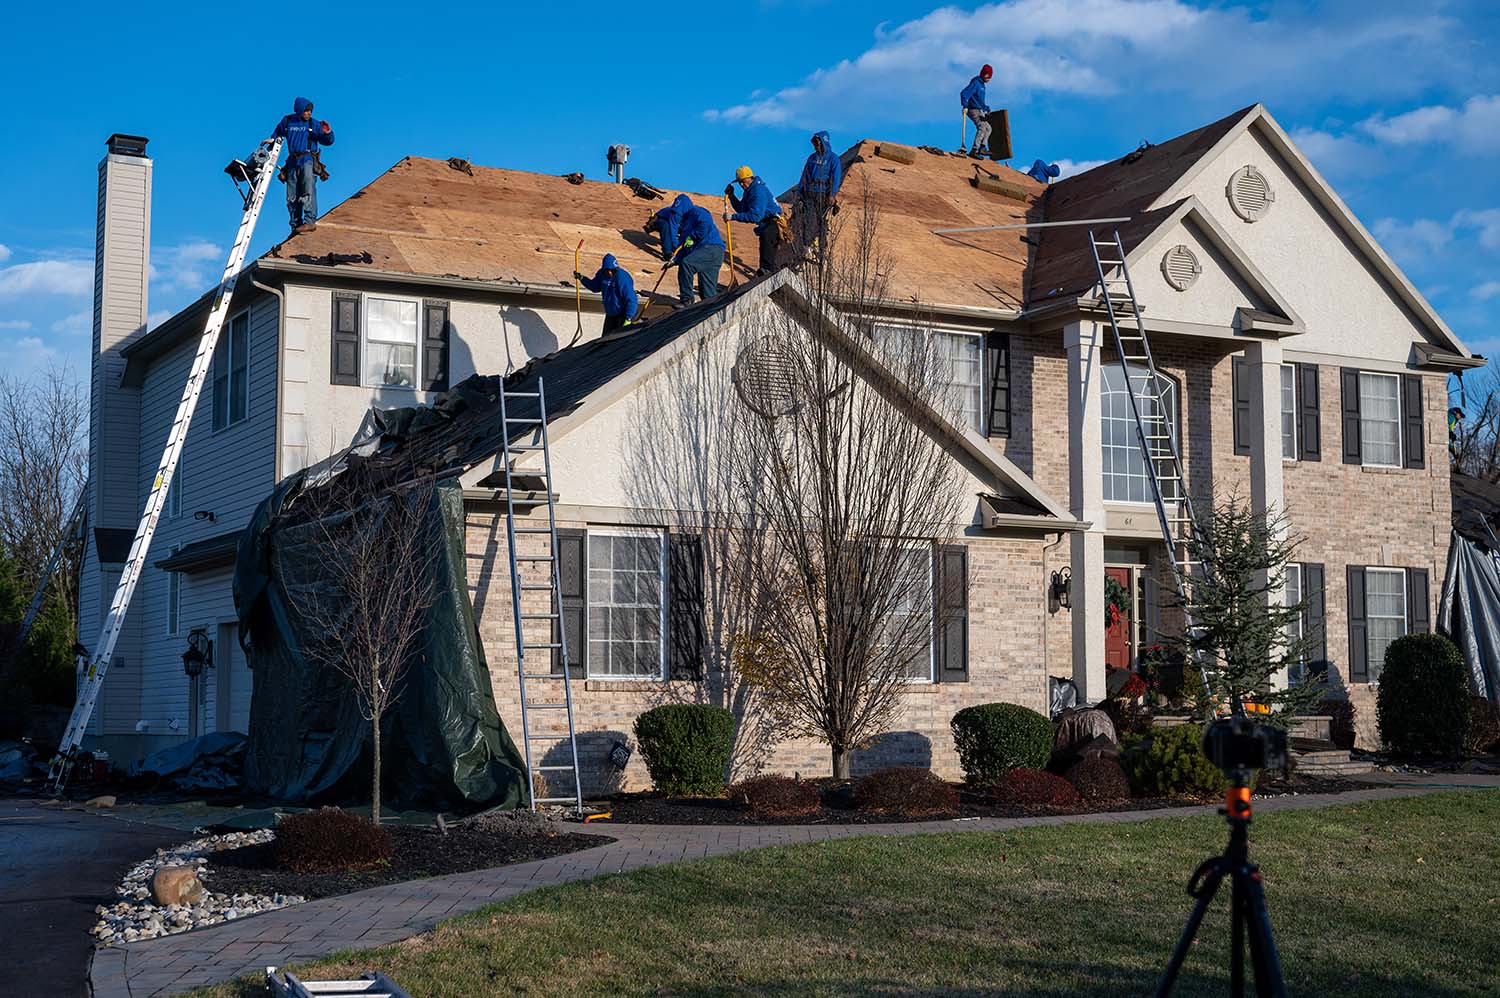 Delaware Roofing repair company - residential roofing contractors in Cherry Hill (medium image)